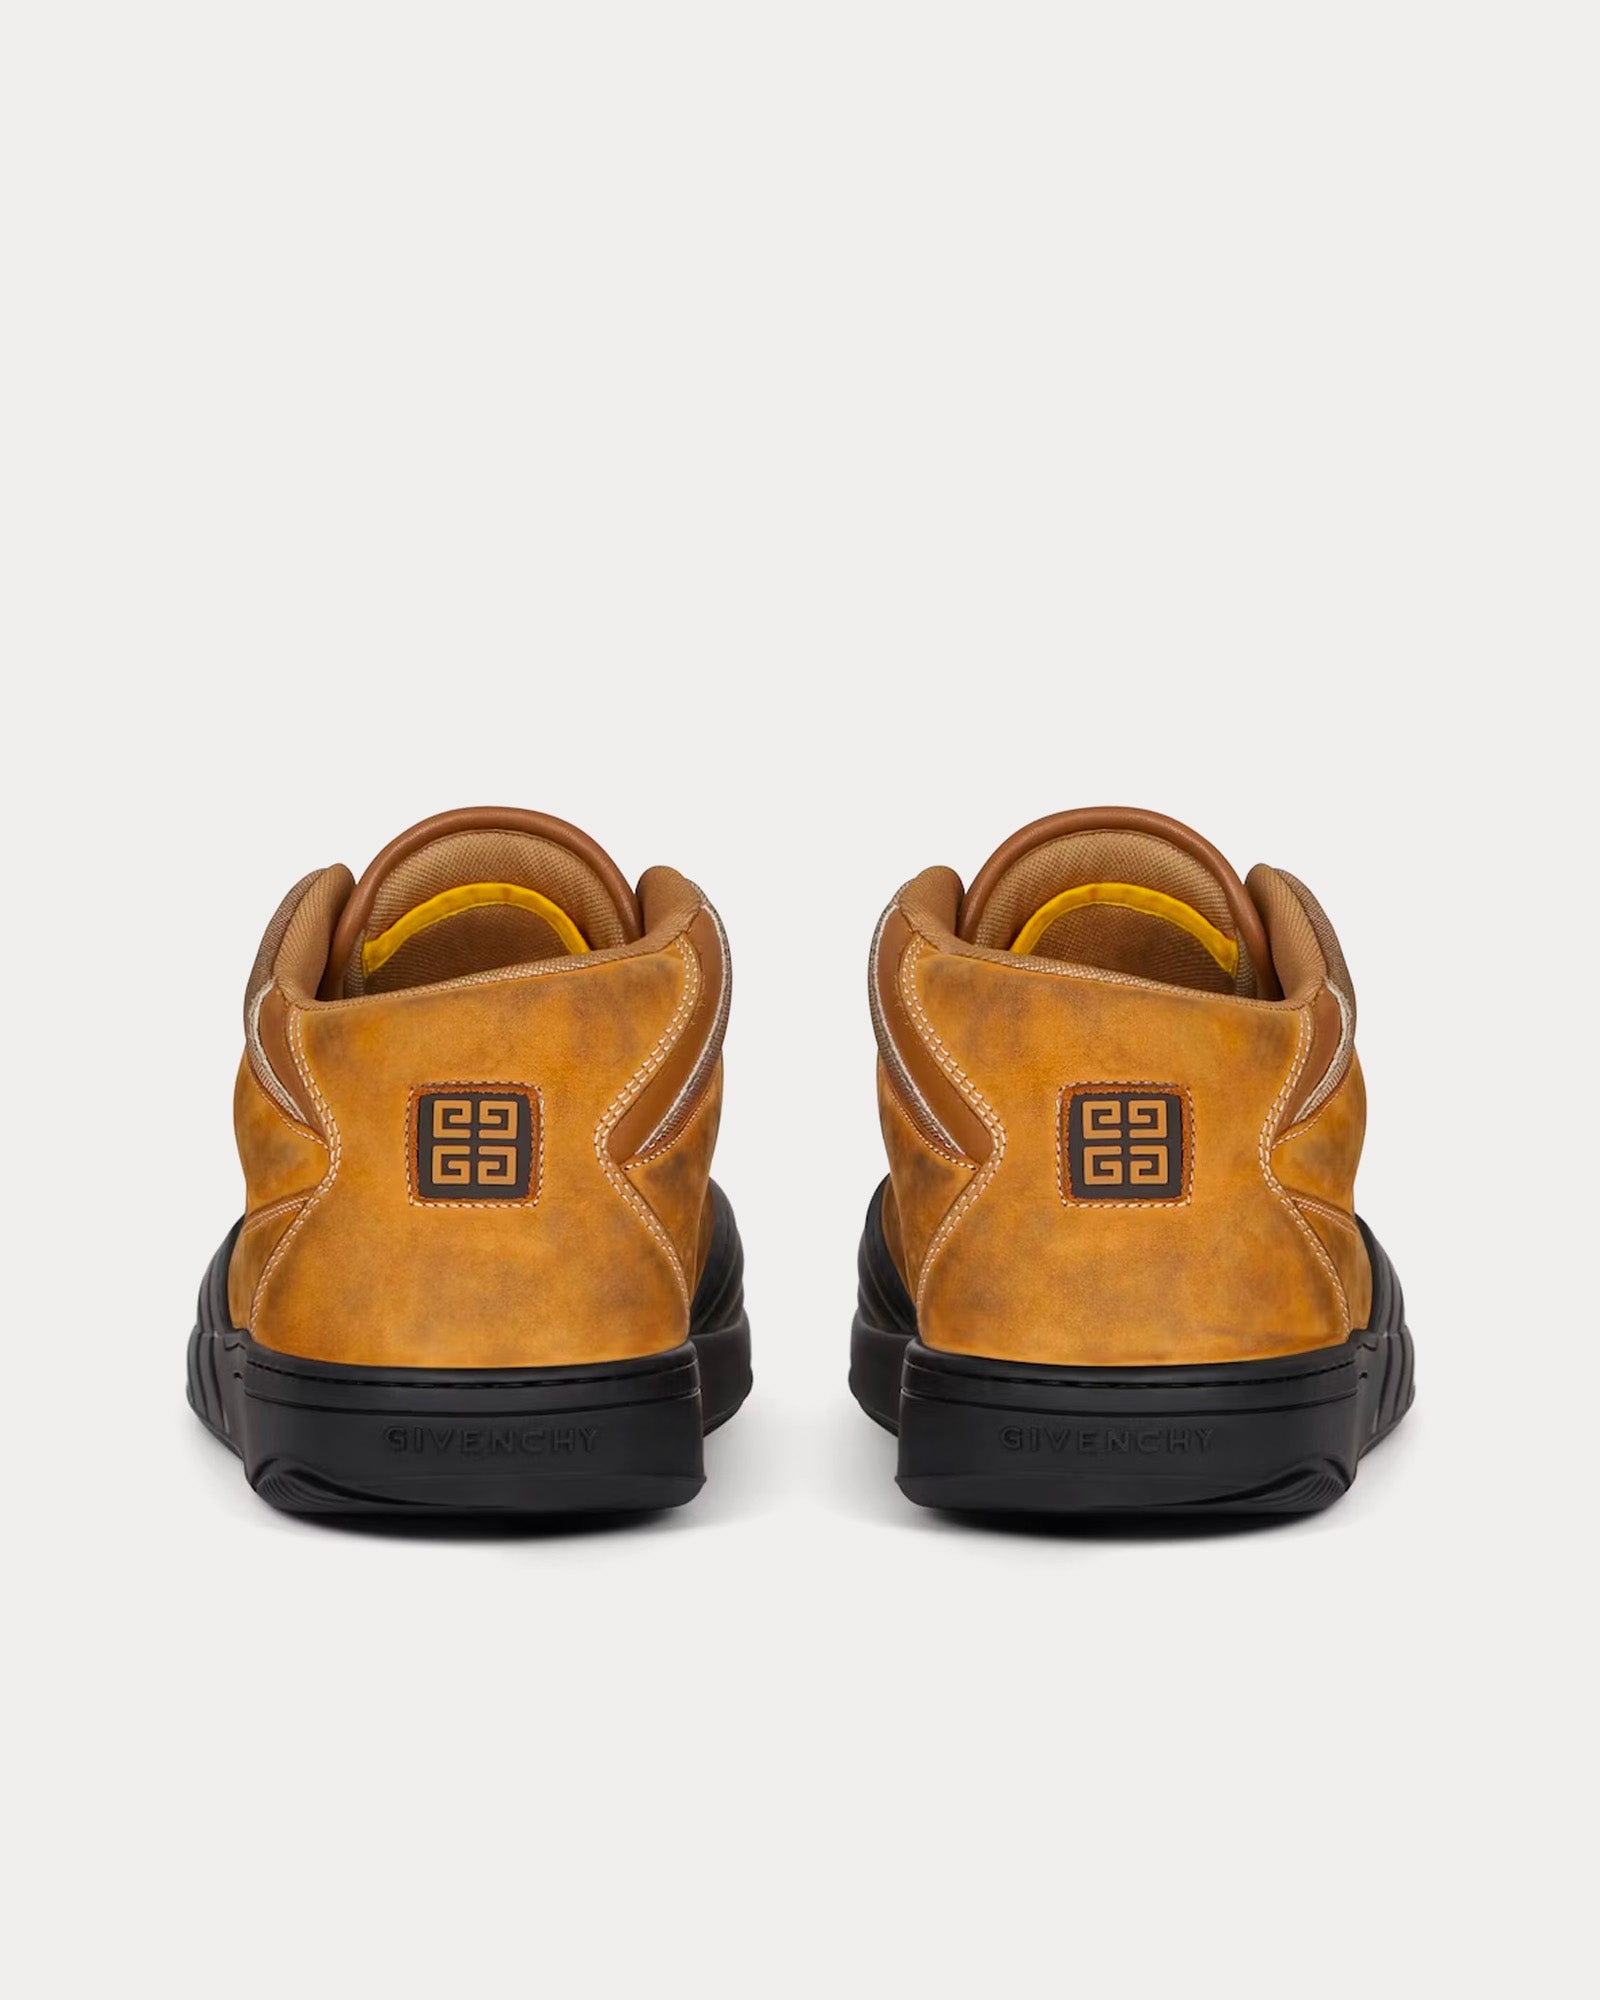 Givenchy - Skate Nubuck & Synthetic Fiber Beige Mid Top Sneakers